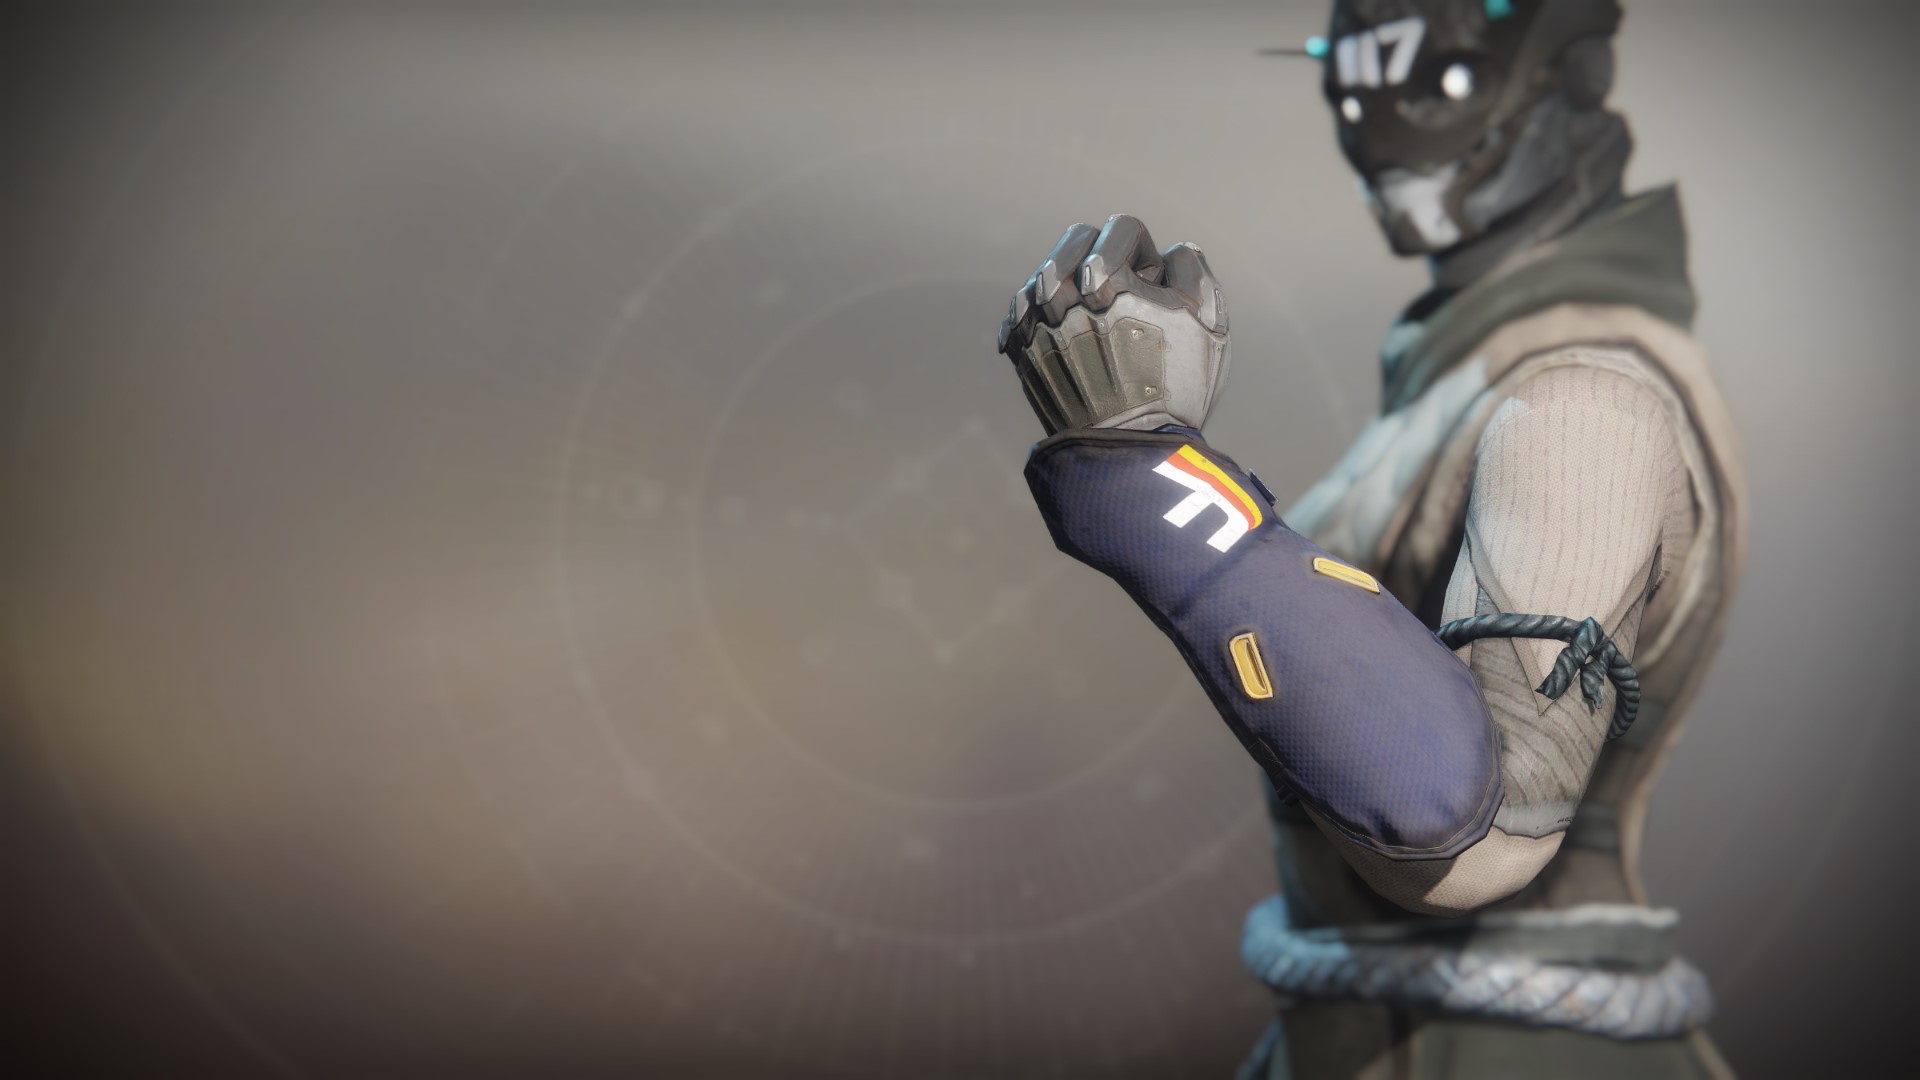 An in-game render of the Simulator Gloves.